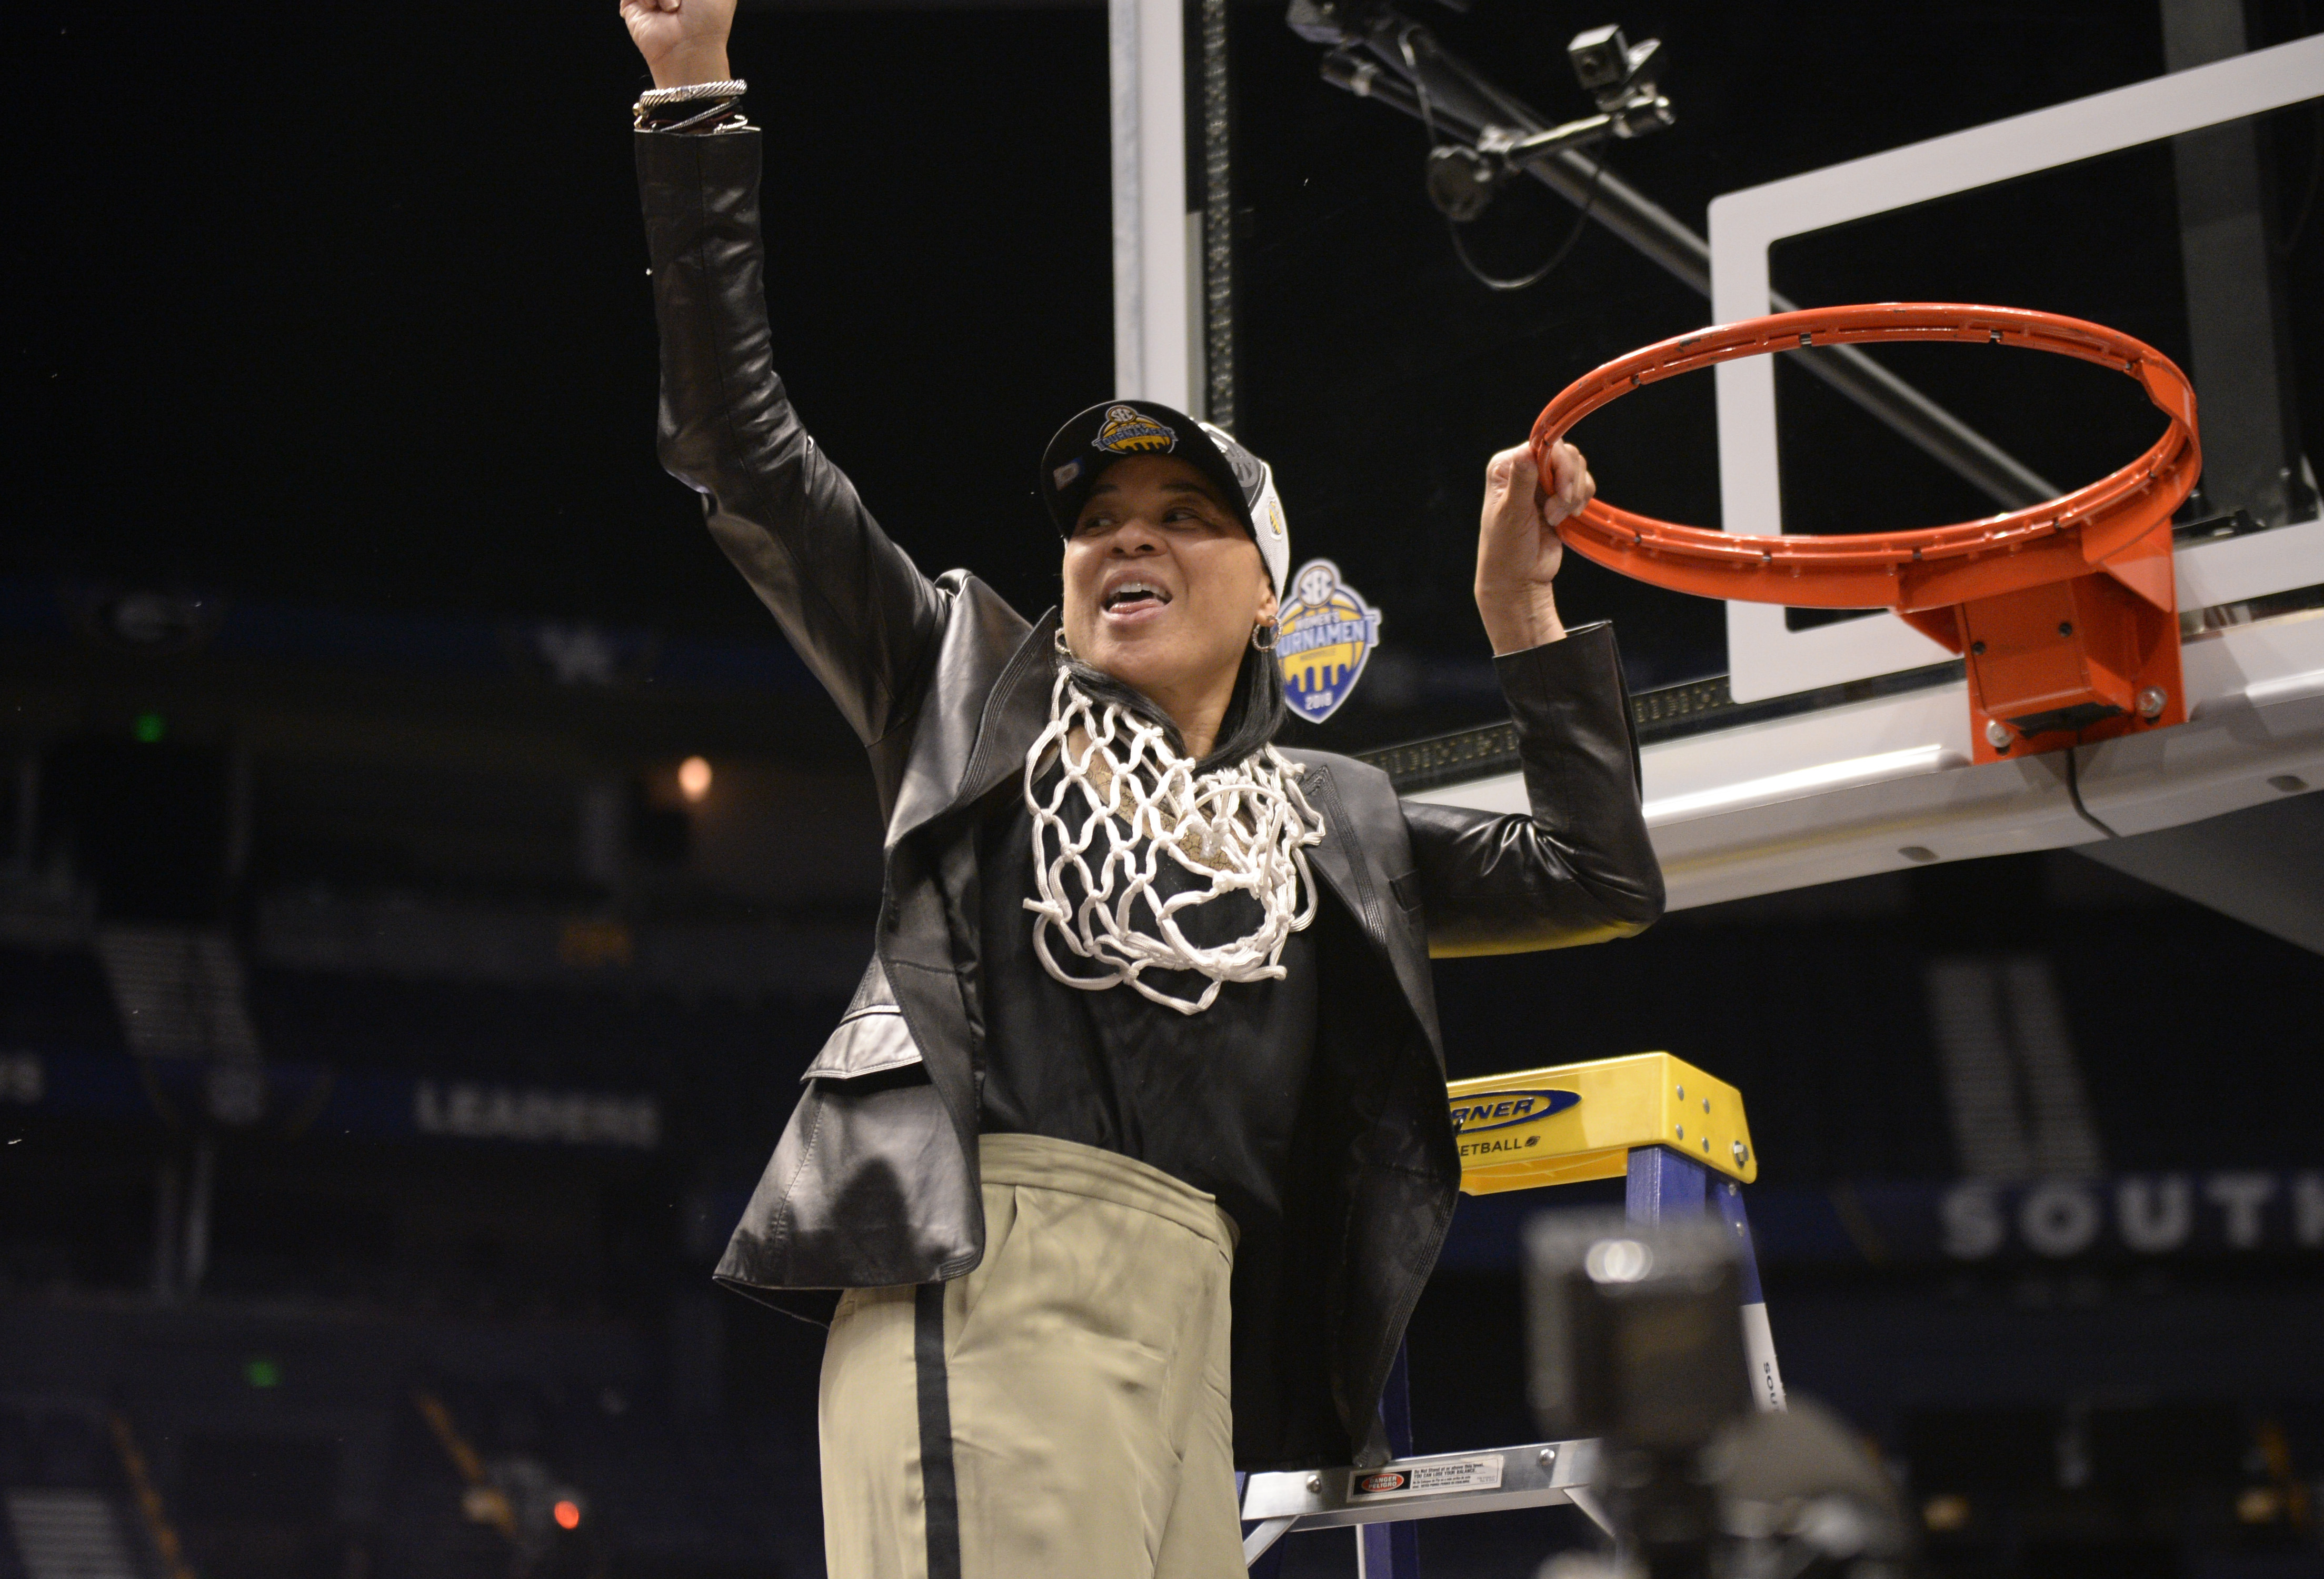 Wome's basketball news: Dawn Staley: 'I don't have any interest' in  Virginia job